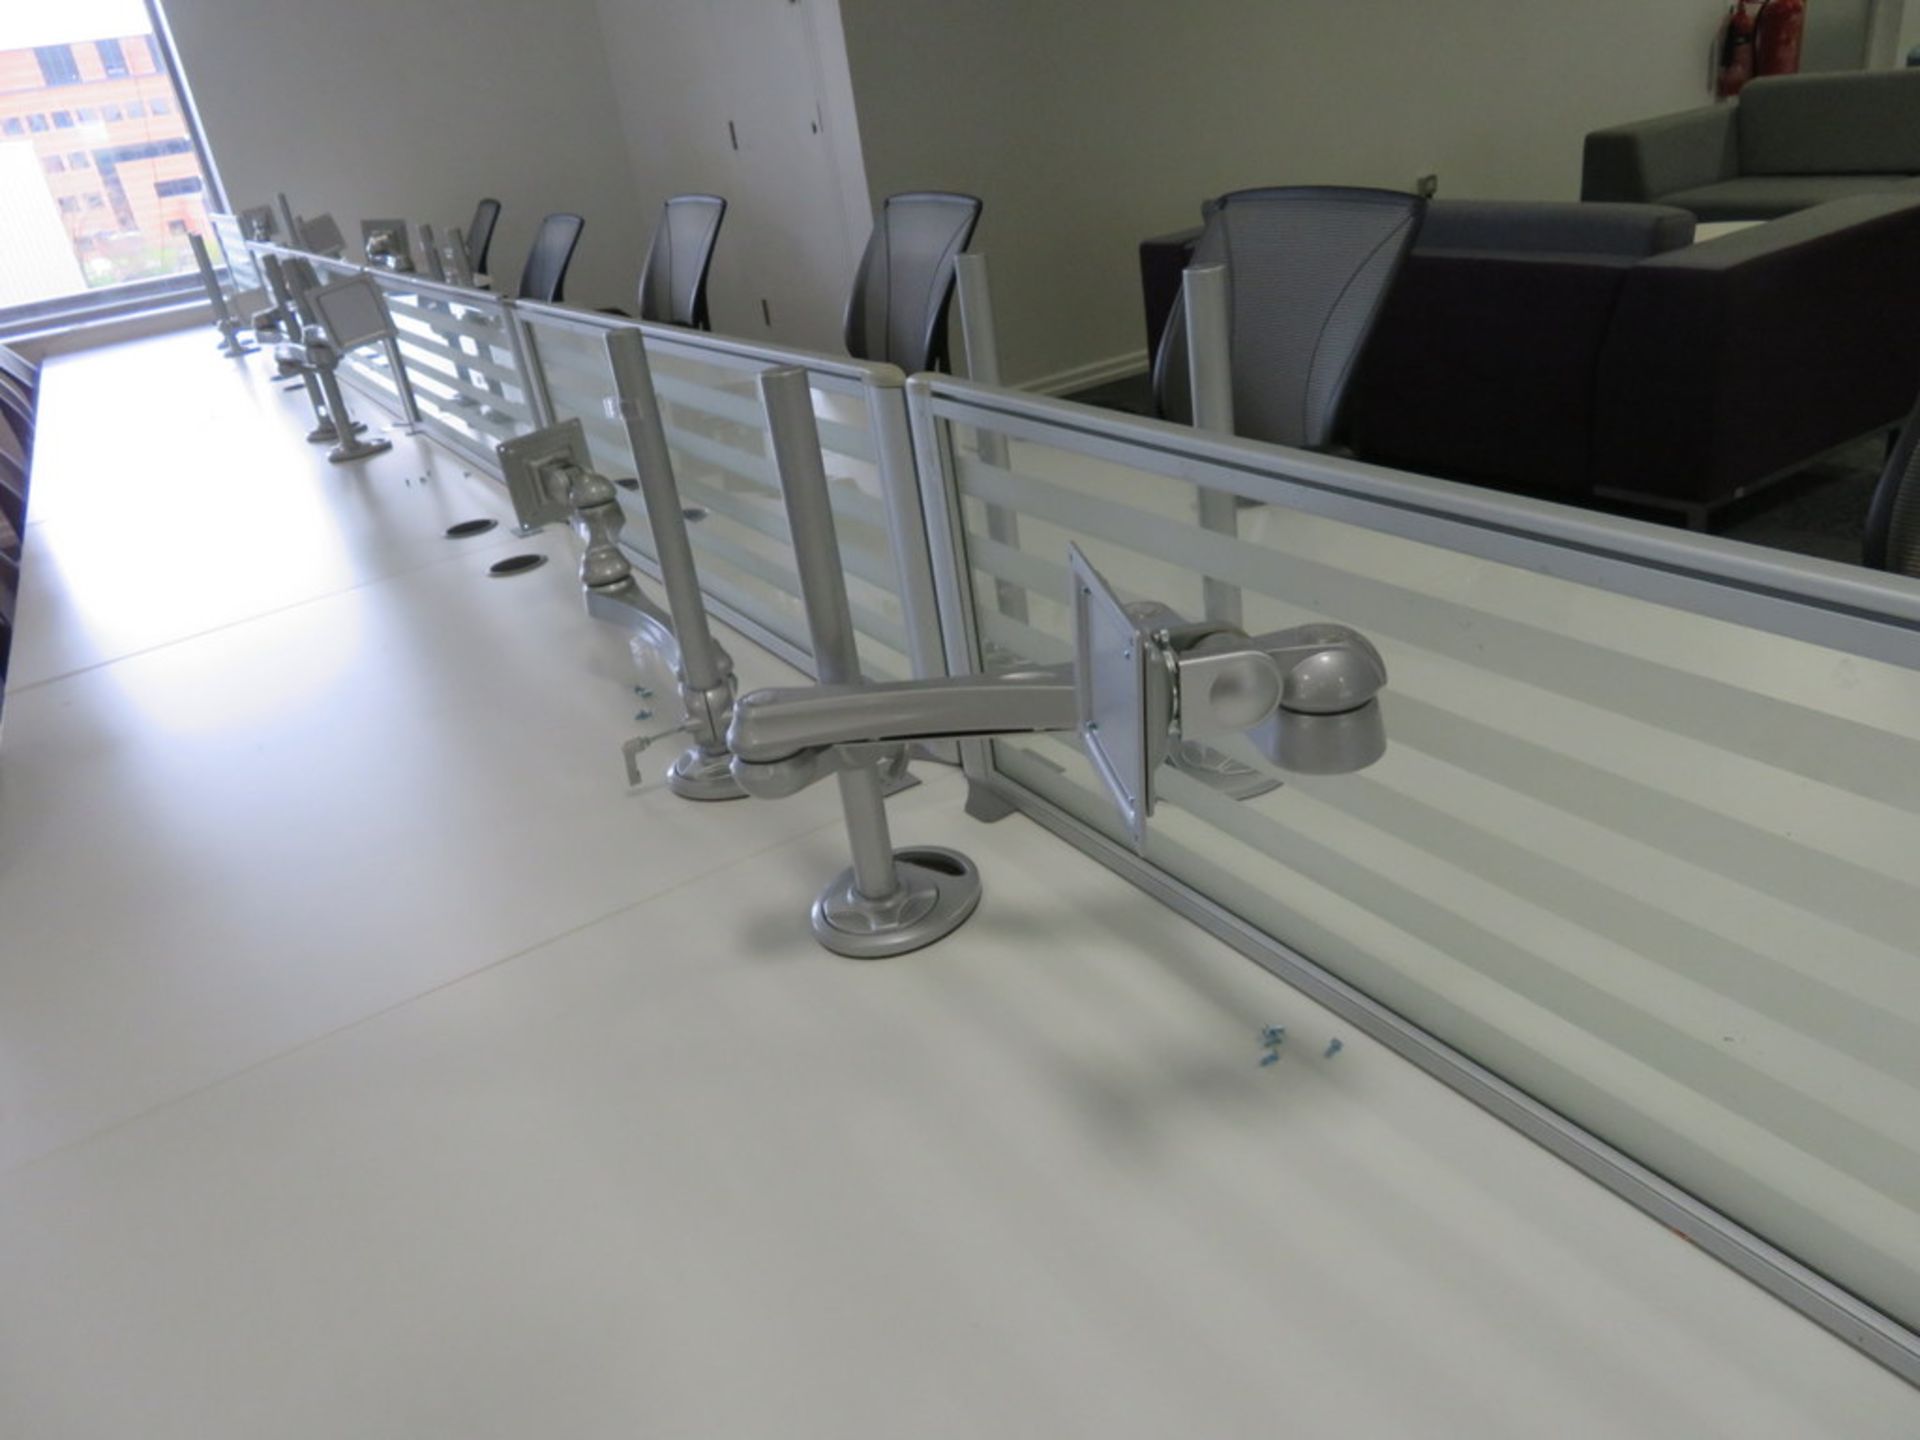 12 Person Desk Arrangement With Dividers, Monitor Arms & Storage Cupboards. Chairs Are Not Included. - Image 4 of 4